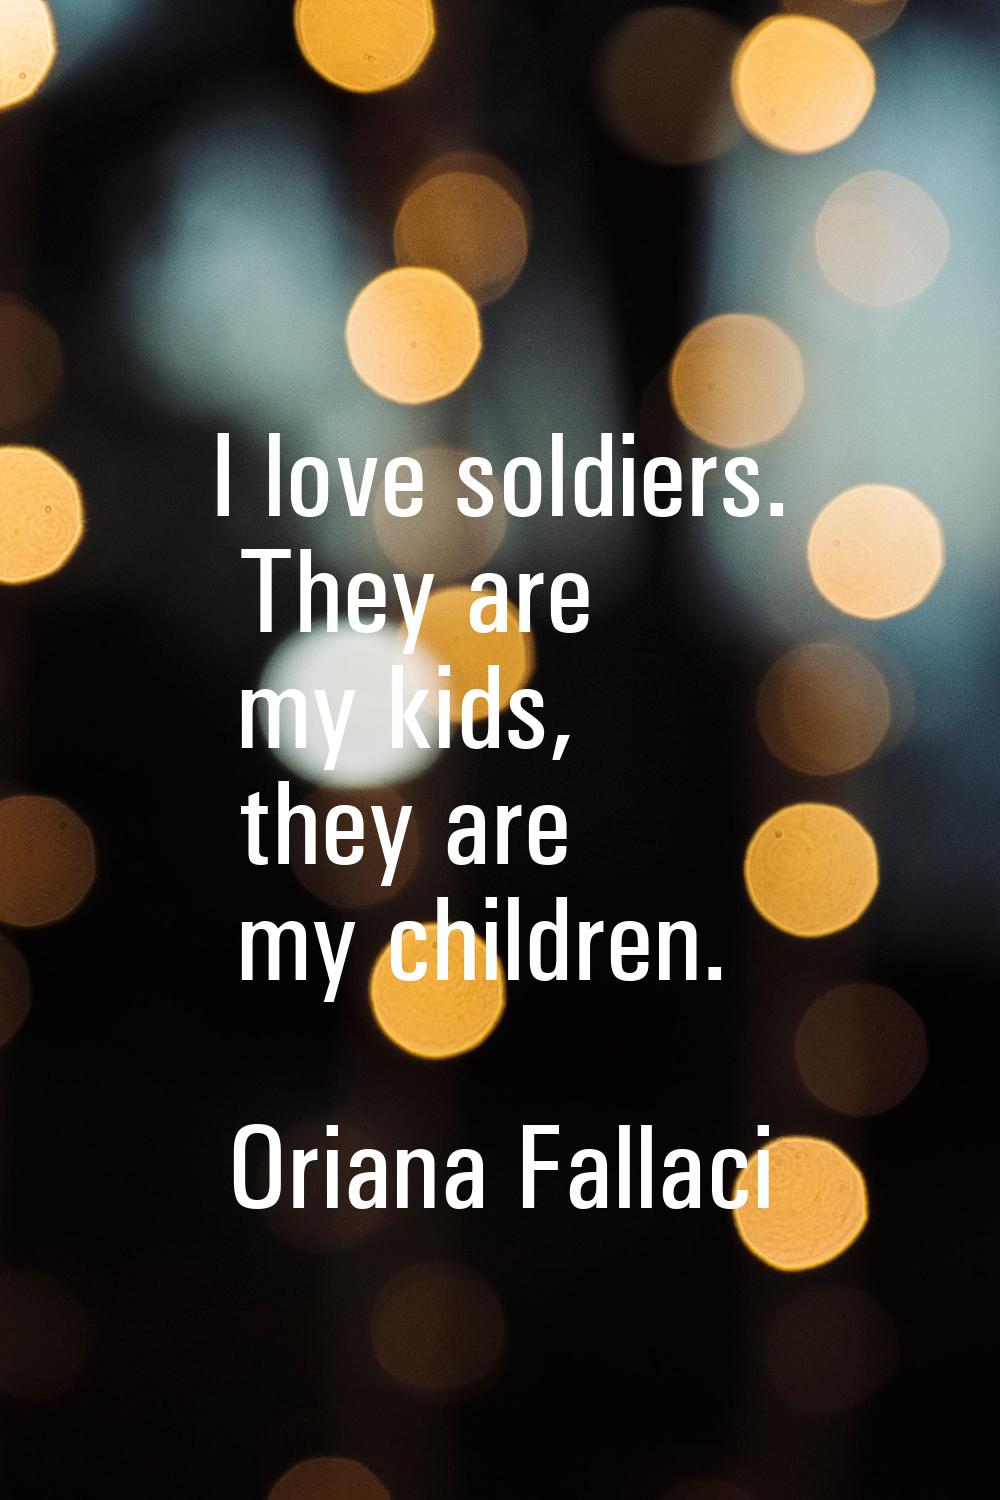 I love soldiers. They are my kids, they are my children.